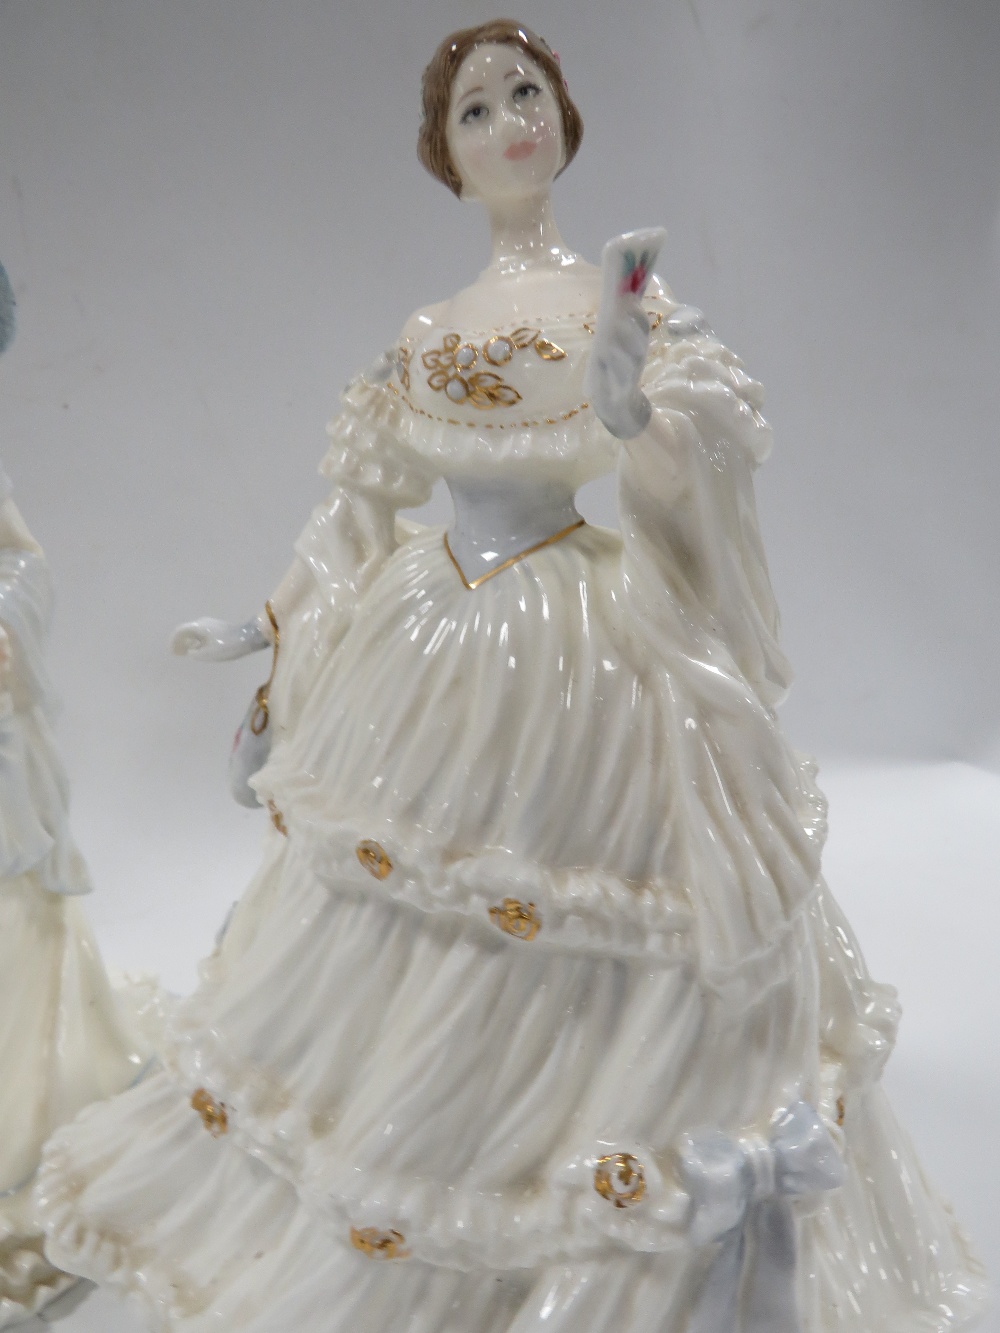 A ROYAL DOULTON FIGURINE "SHALL I COMPARE THEE" TOGETHER WITH "NATALIE" AND TWO COALPORT - Image 2 of 5